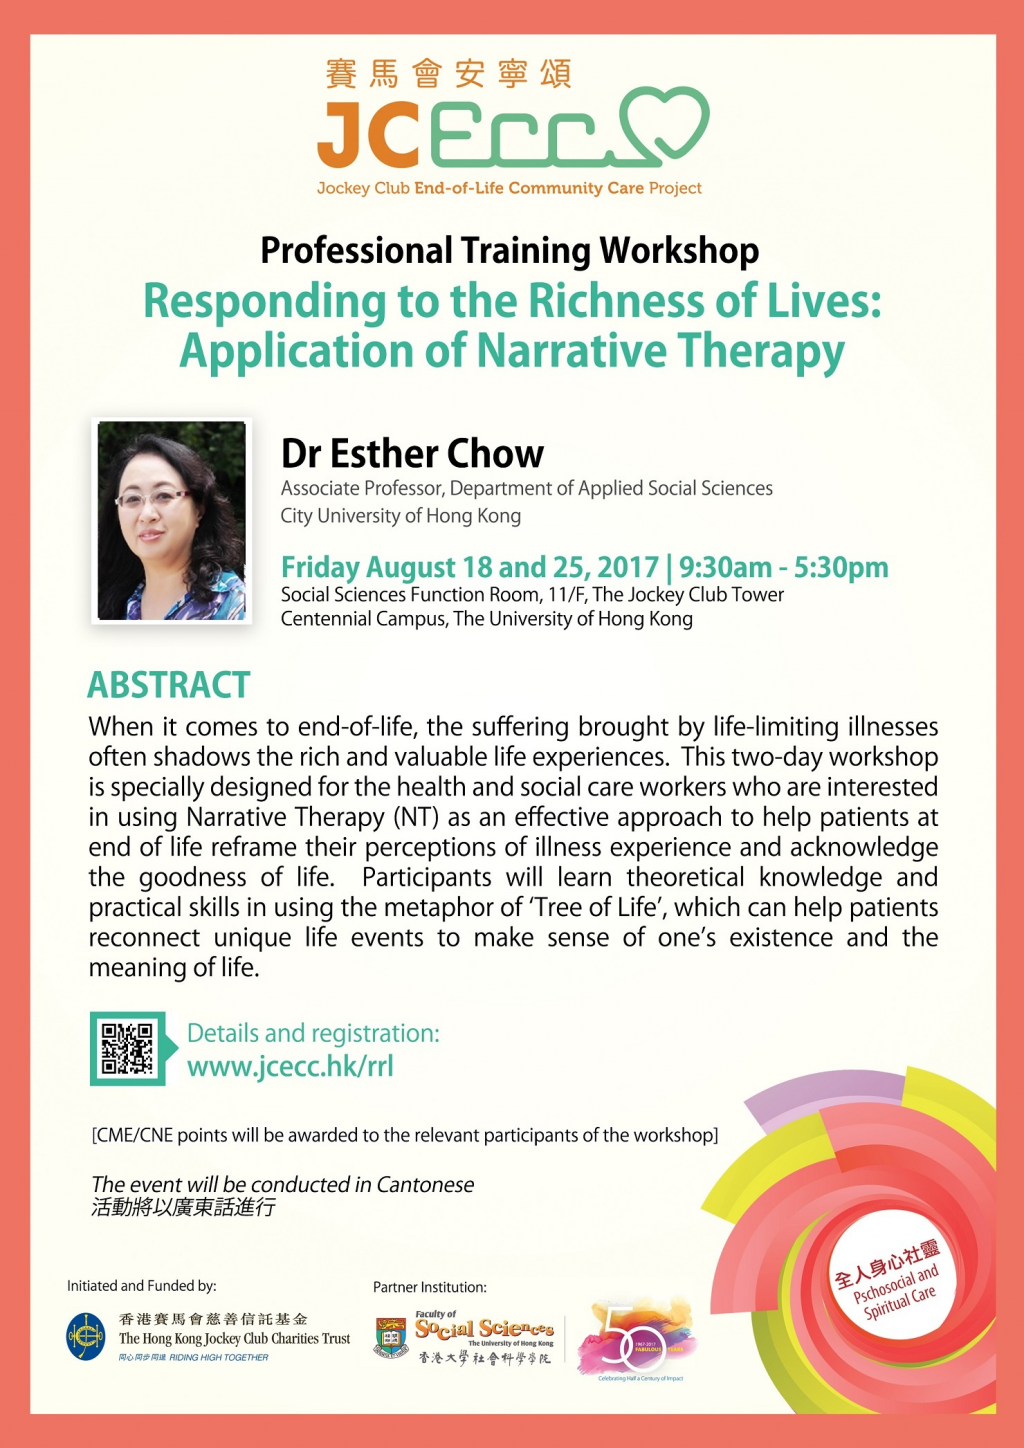 JCECC Workshop on Responding to the Richness of Lives: Application of Narrative Therapy 